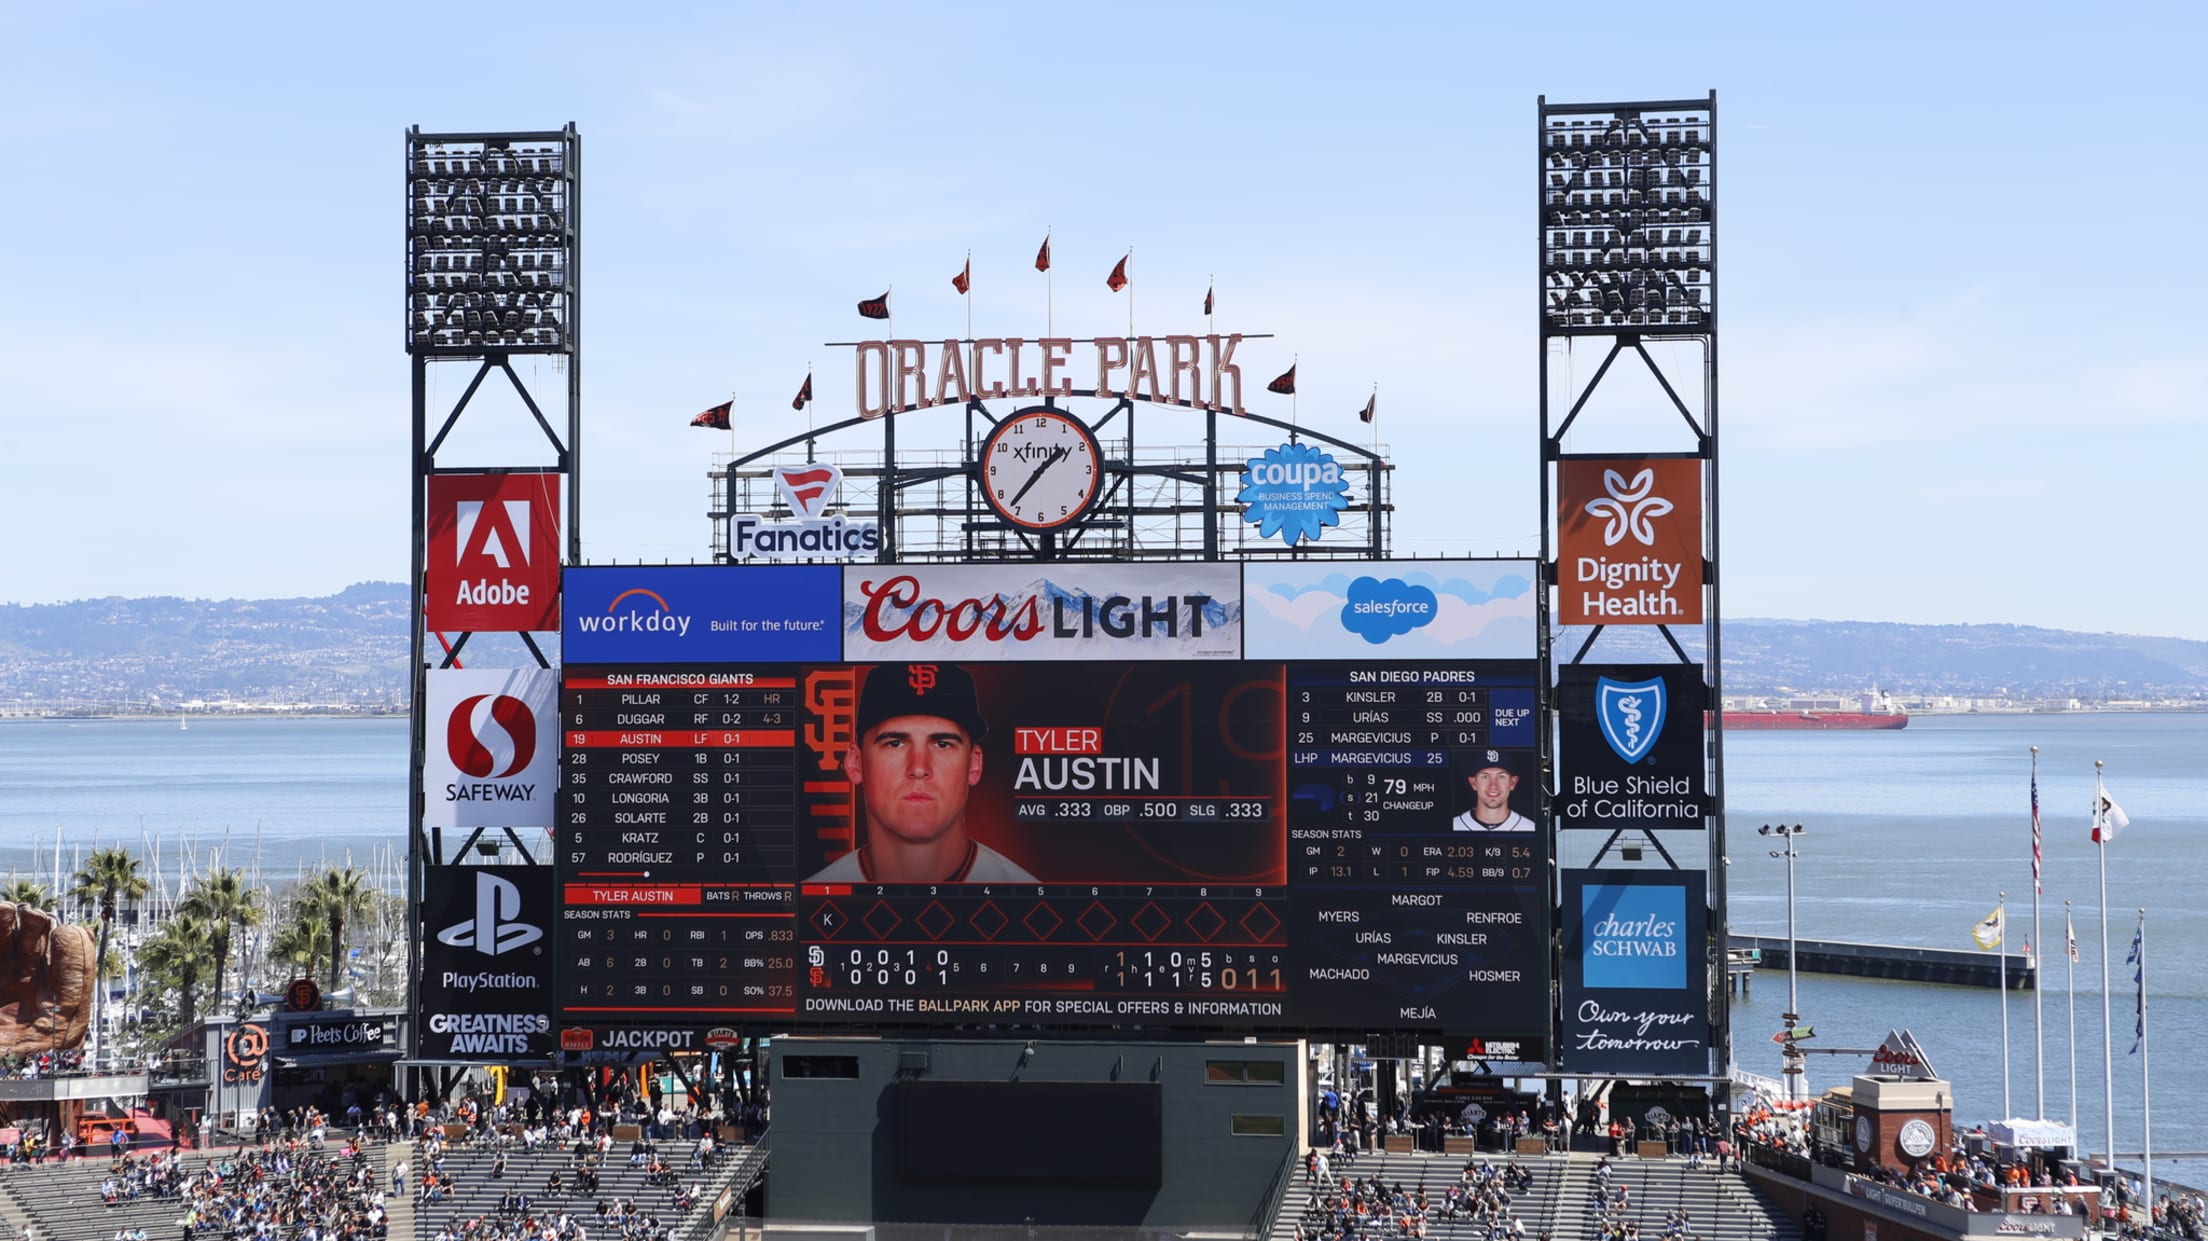 Oracle Park - All You Need to Know BEFORE You Go (with Photos)